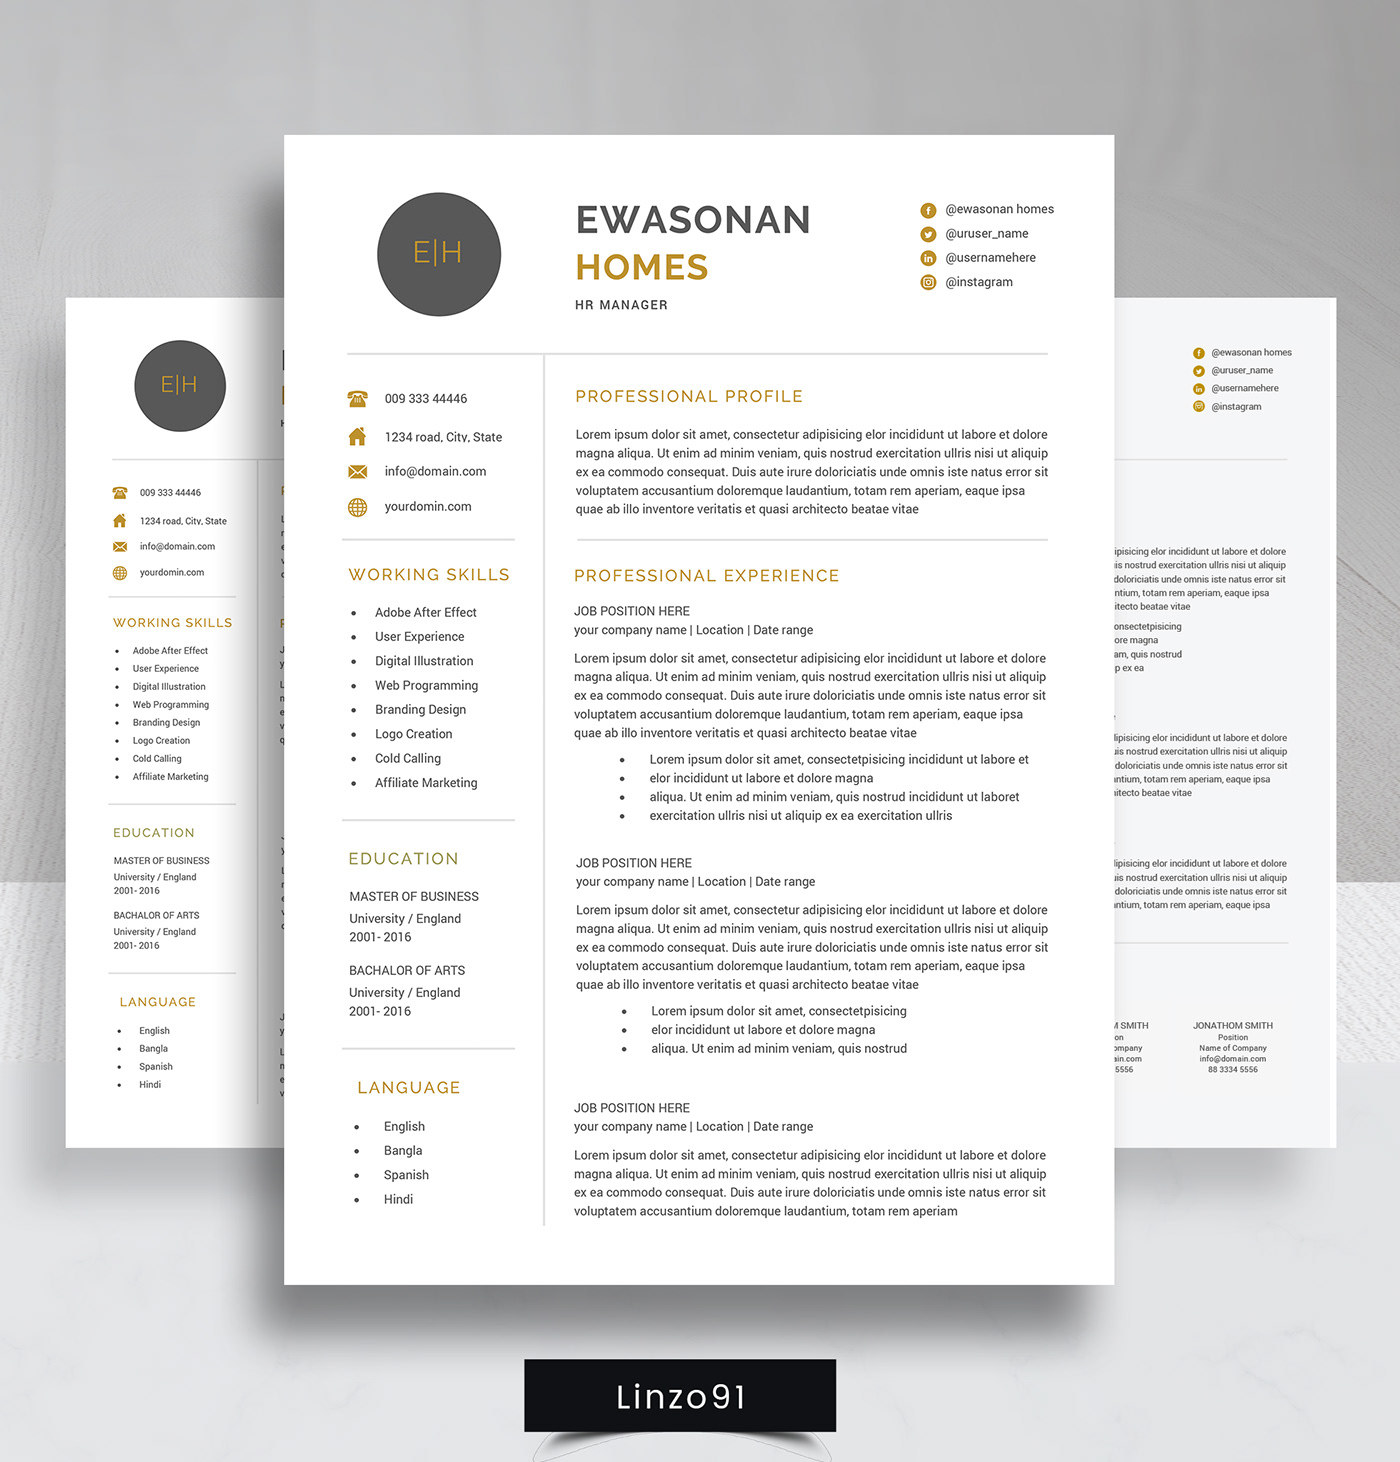 https://www.etsy.com/listing/602519460/minimal-resume-3-pages-cv-template-for?ref=shop_home_active_9 a4 Resume cover letter Curriculum Vitae CV CV template job letter template modern